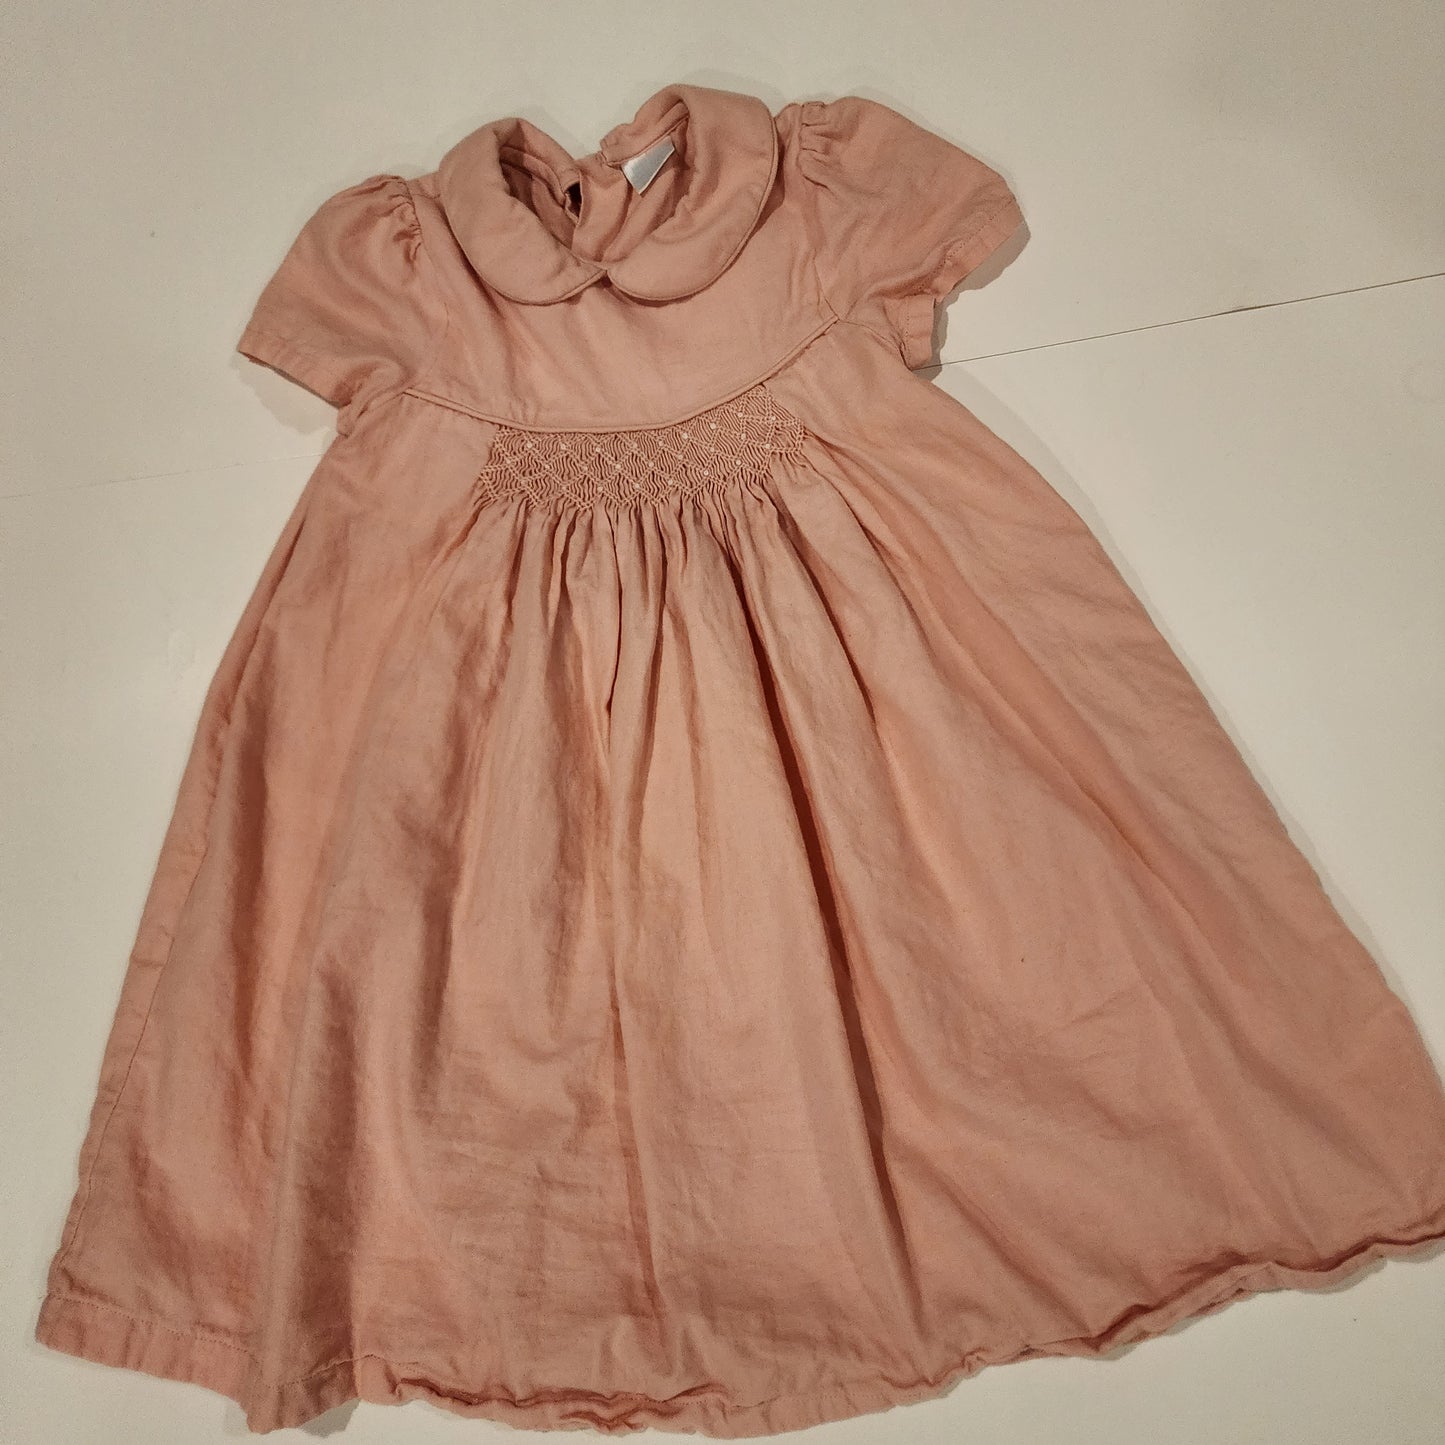 Girls 3T Edgehill Collection dress with smocking